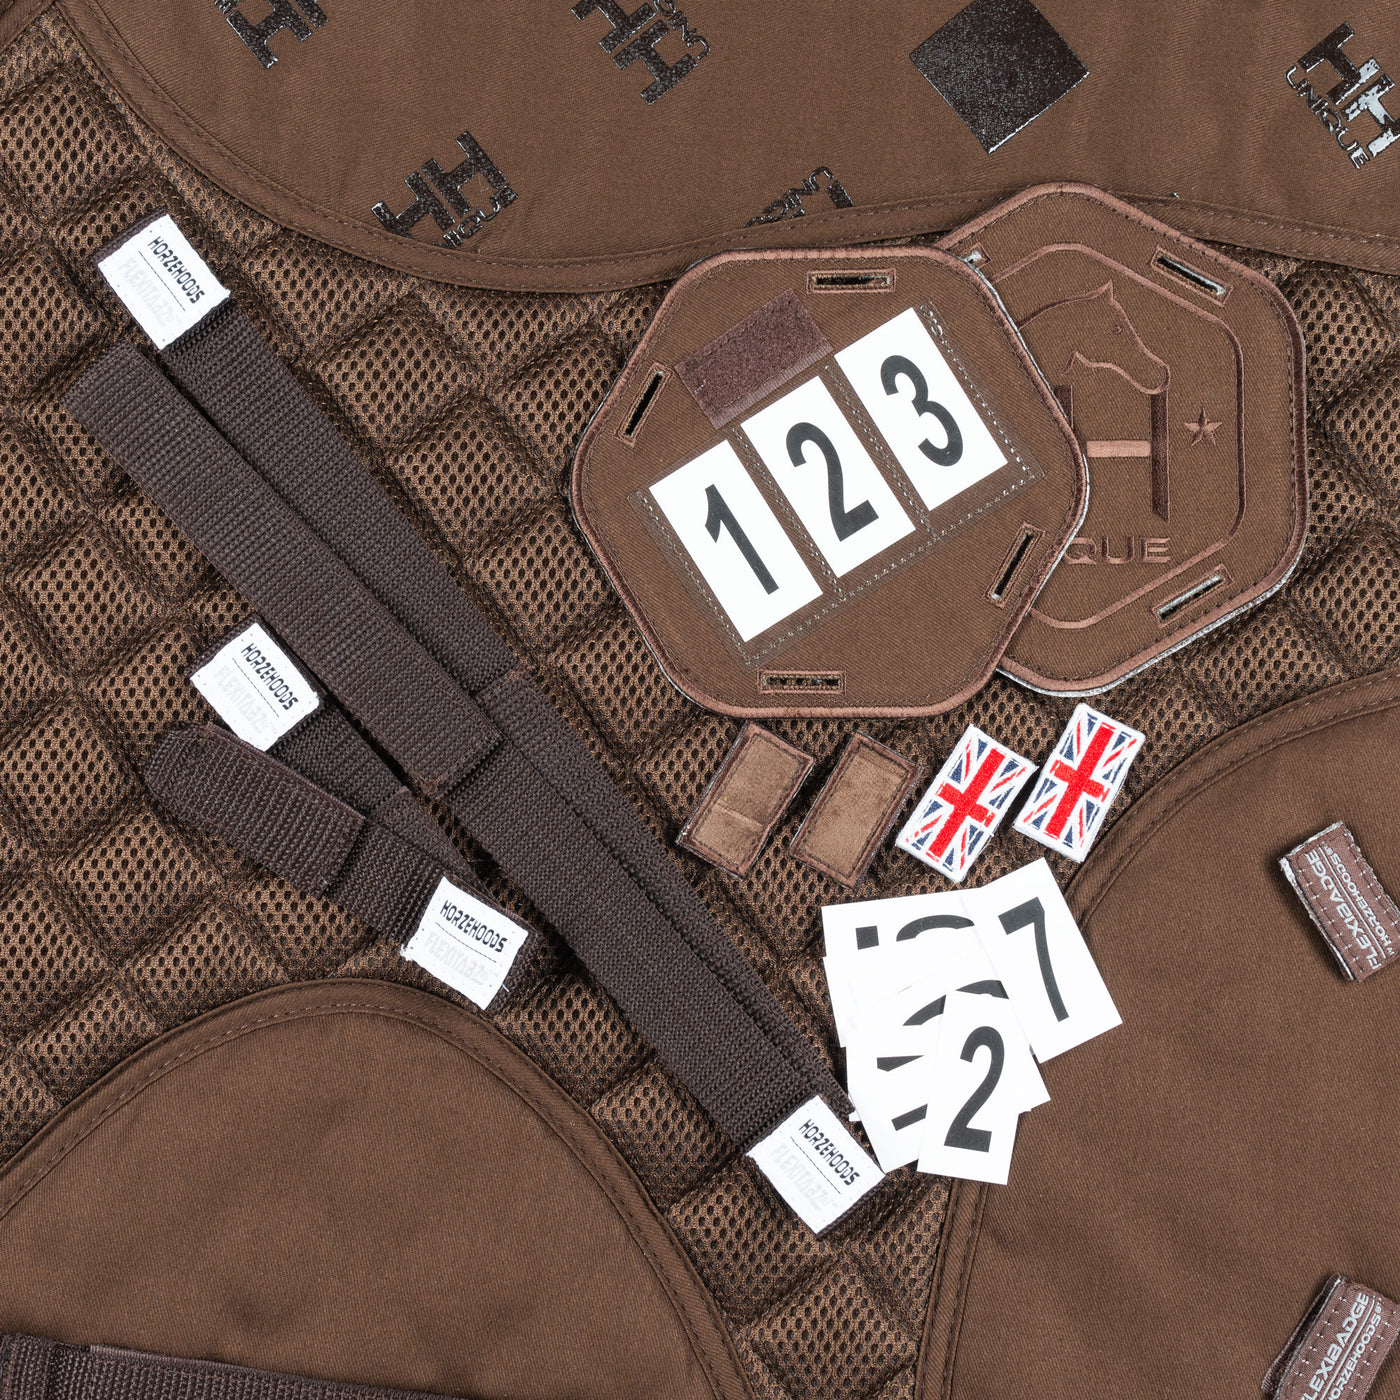 Brown FlexiBadge4D™️ Competition Pad GP/Jump KIT Pack